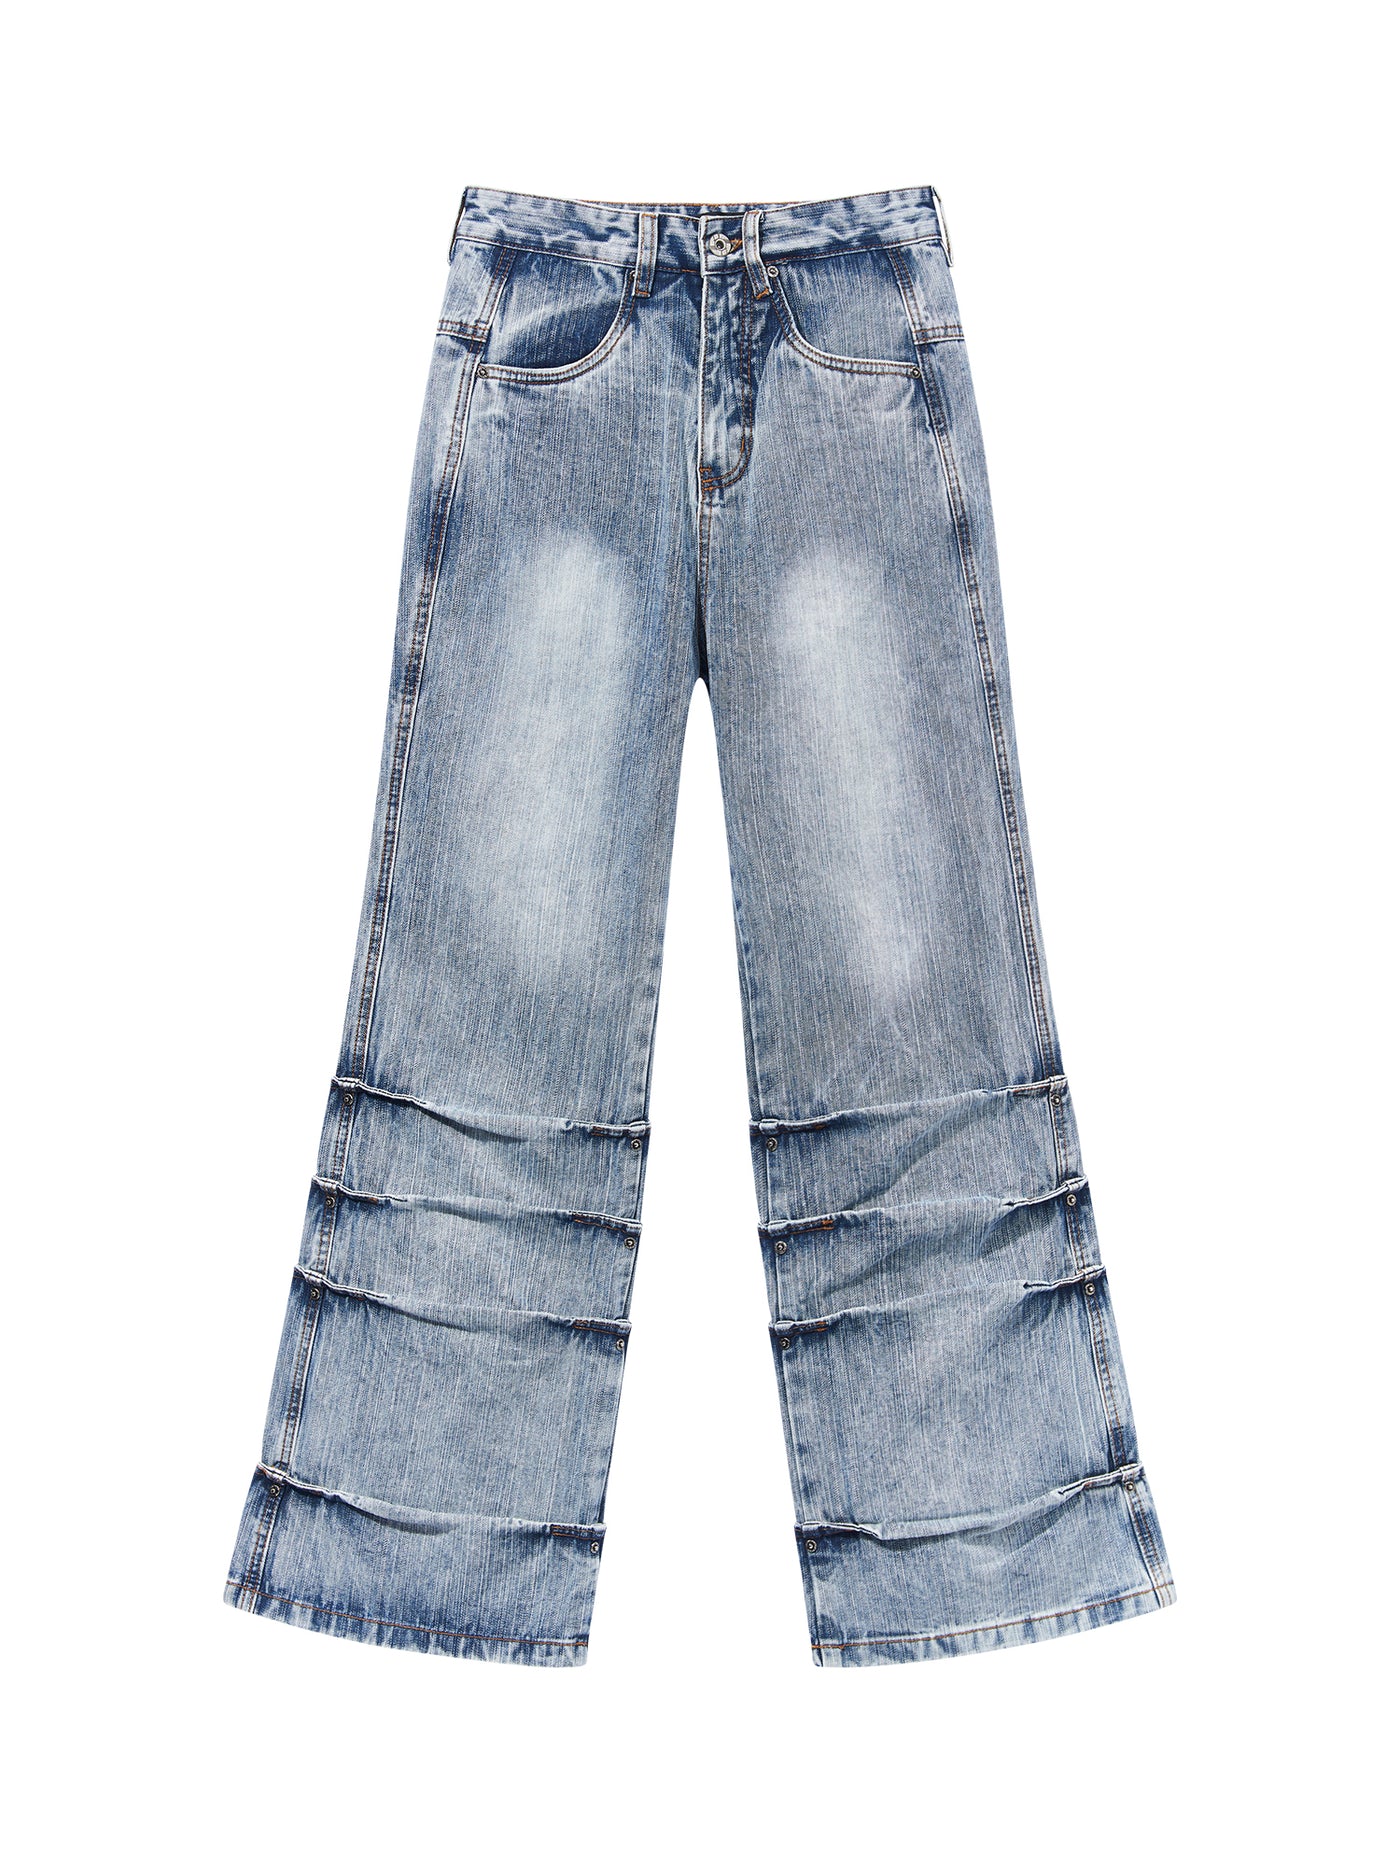 BLIND NO PLAN Washed Bamboo Pinch Pleat Denim Jeans